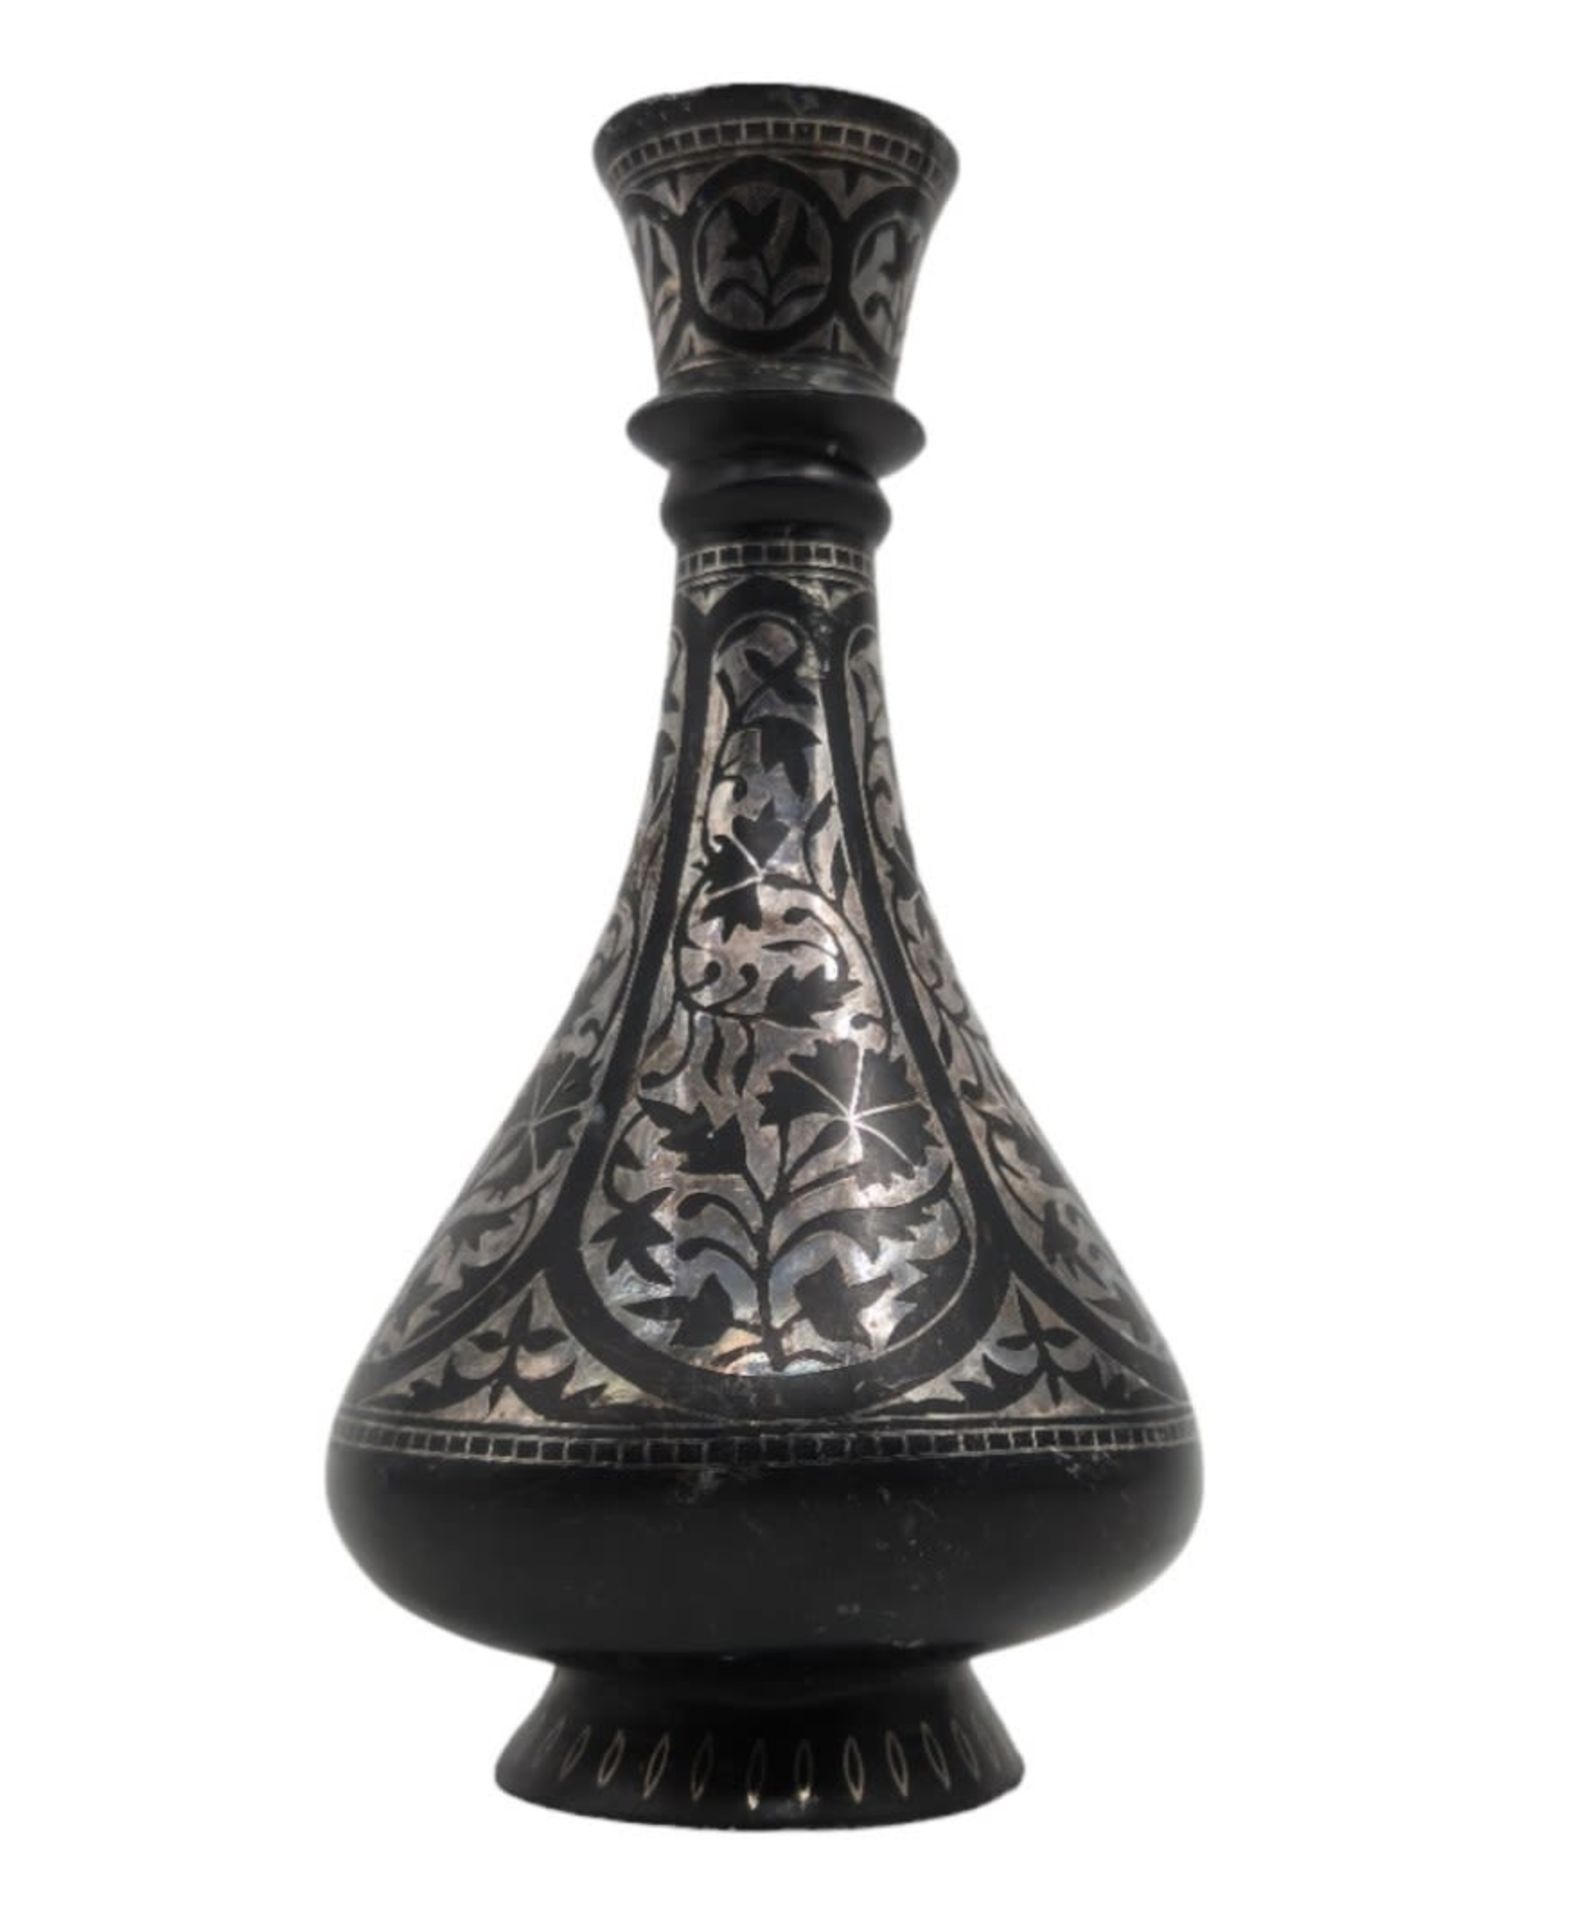 An antique Indian Bidri vase, made of metal inlaid with silver, second half of the 19th century, - Bild 2 aus 5